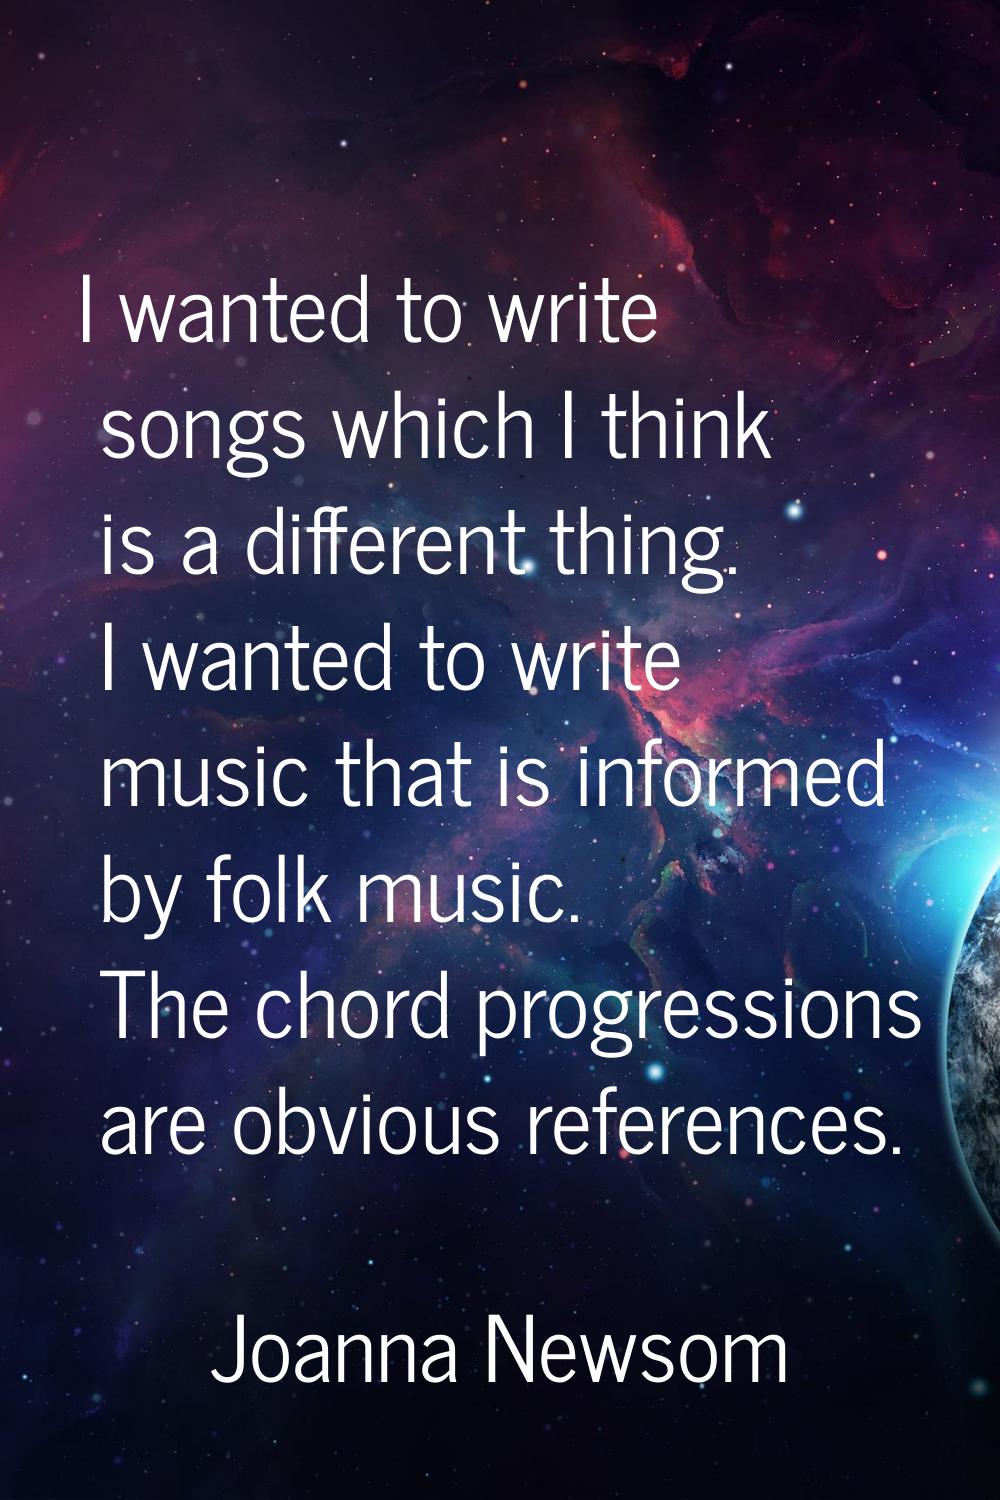 I wanted to write songs which I think is a different thing. I wanted to write music that is informe